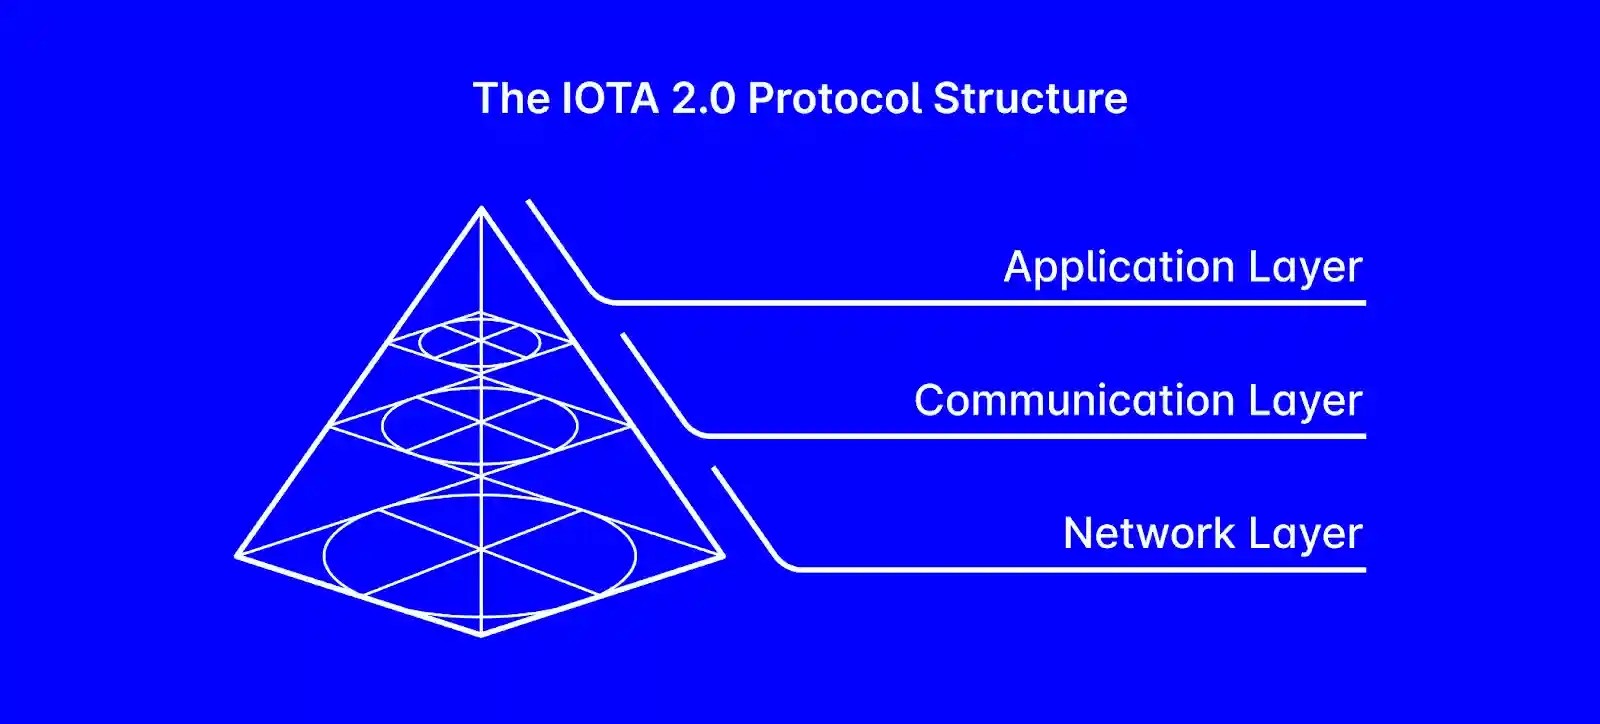 A sketch showing IOTA 2.0 Protocol Structure that consists of a Network Layer, Communication Layer and Application Layer. 